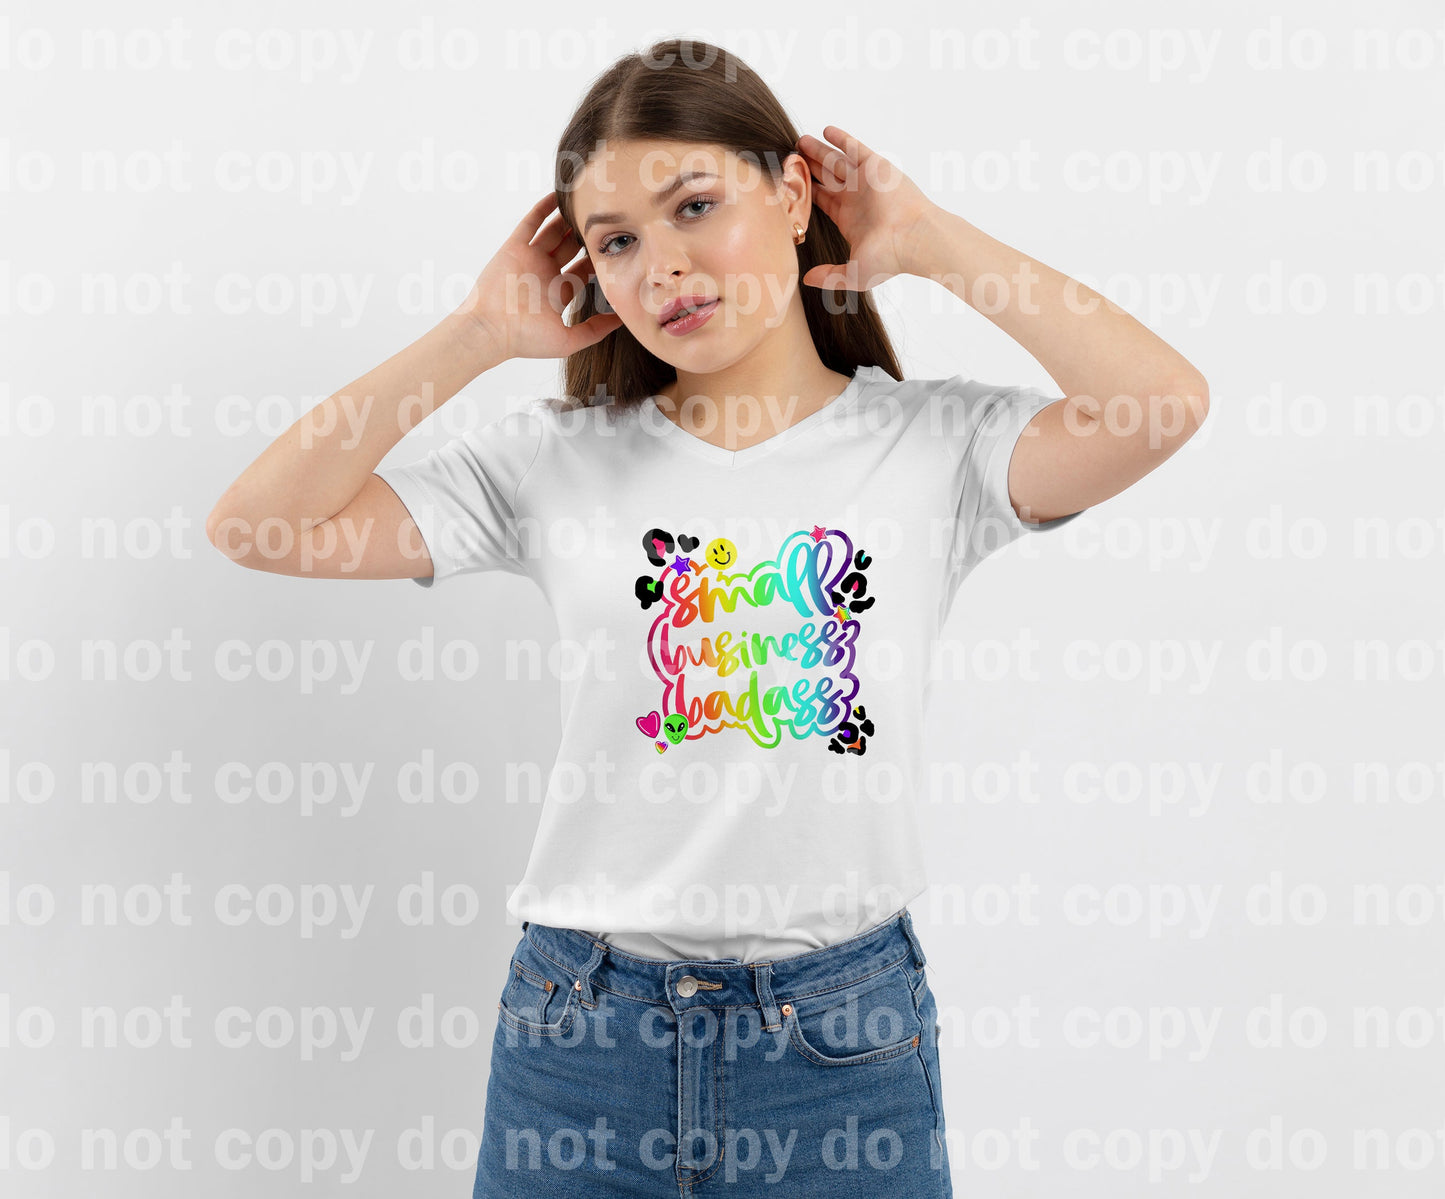 Small Business Badass 90's Sticker Inspired Dream Print or Sublimation Print